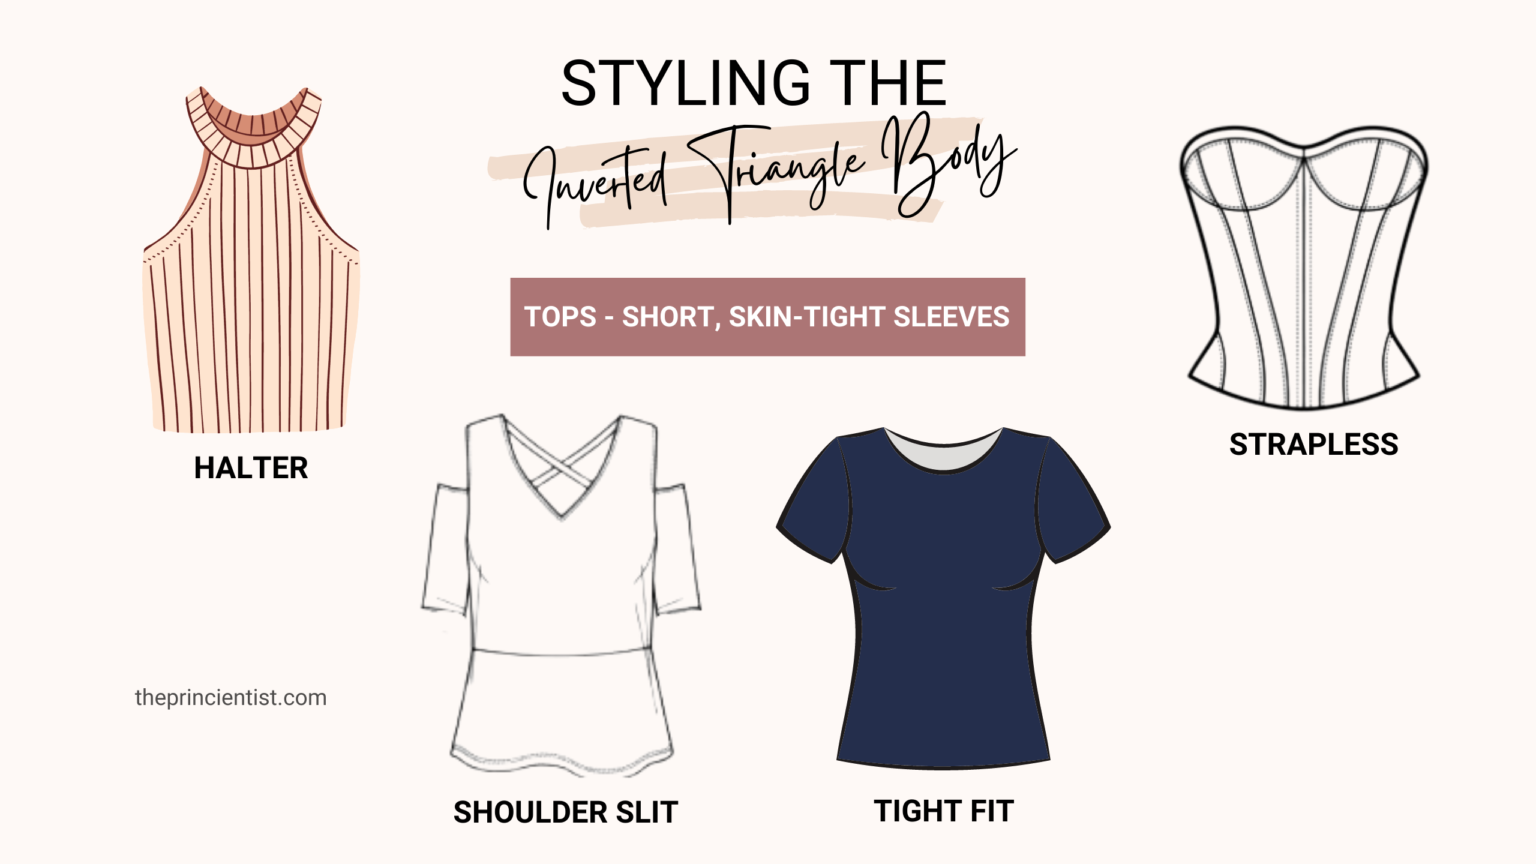 How to dress the inverted triangle body shape?